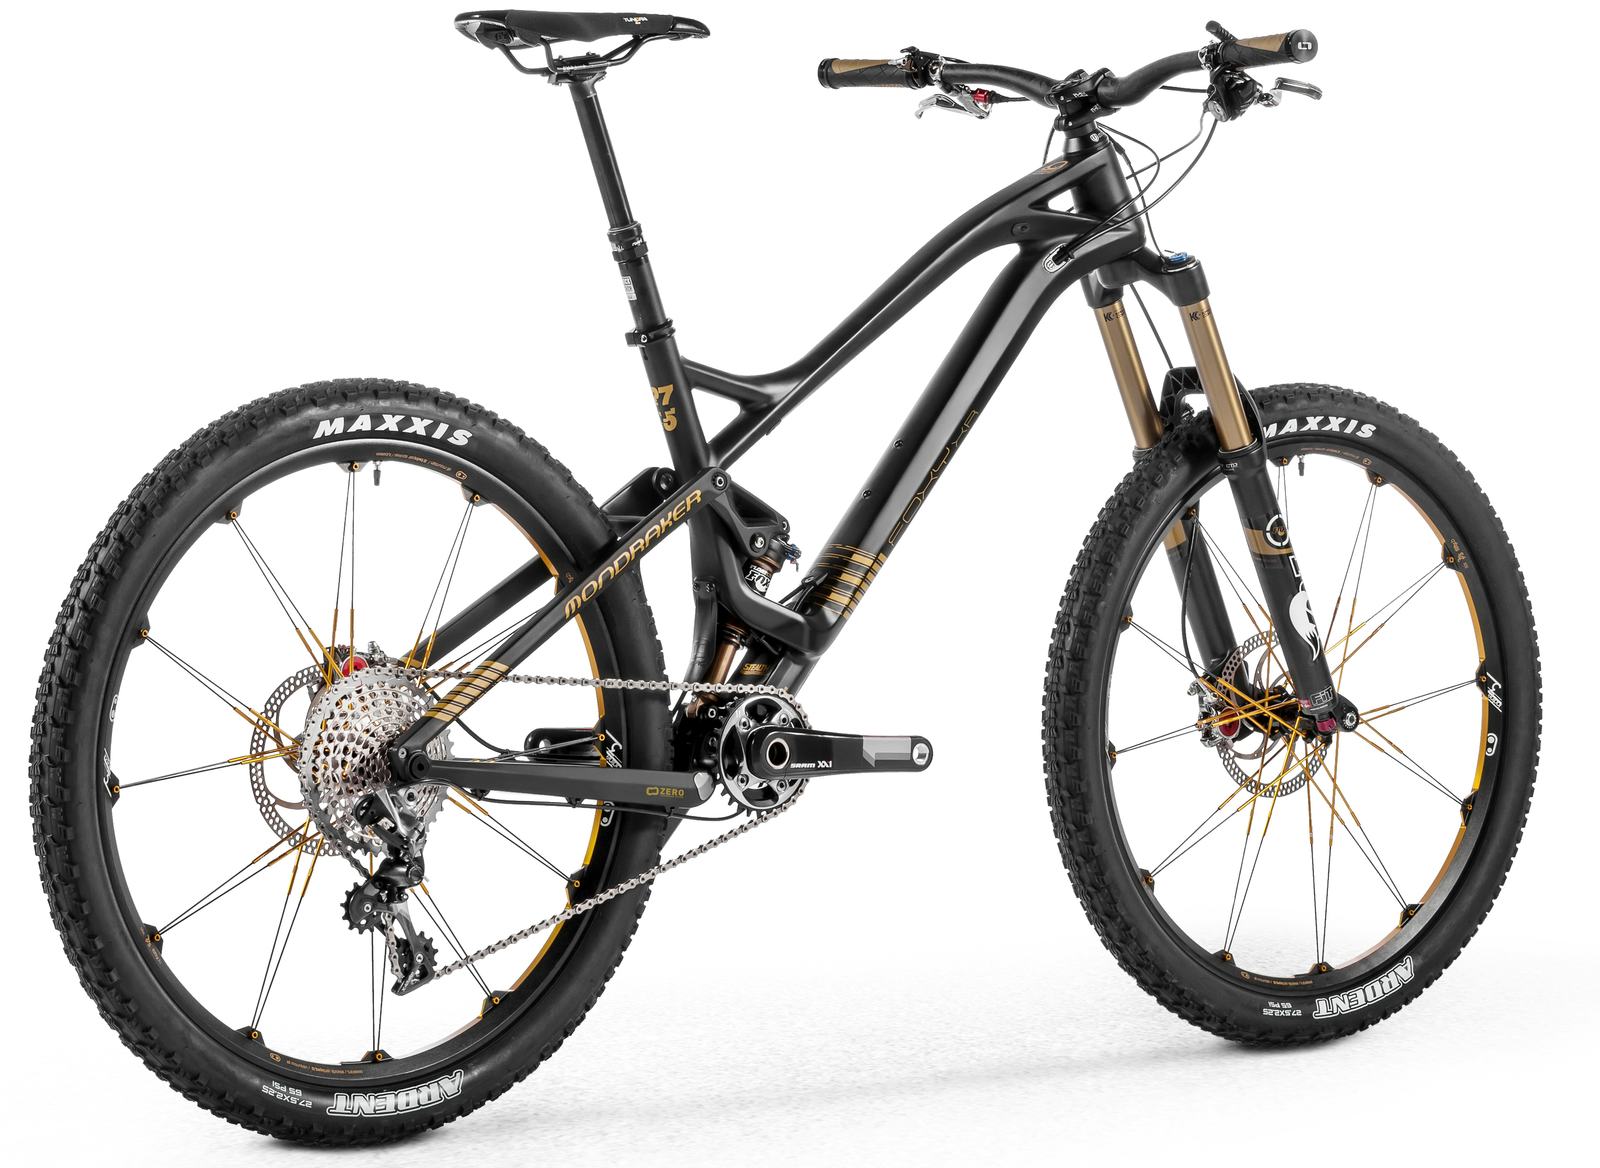 Mondraker Foxy With Unique Forward Geometry Gets High-end Carbon Frame